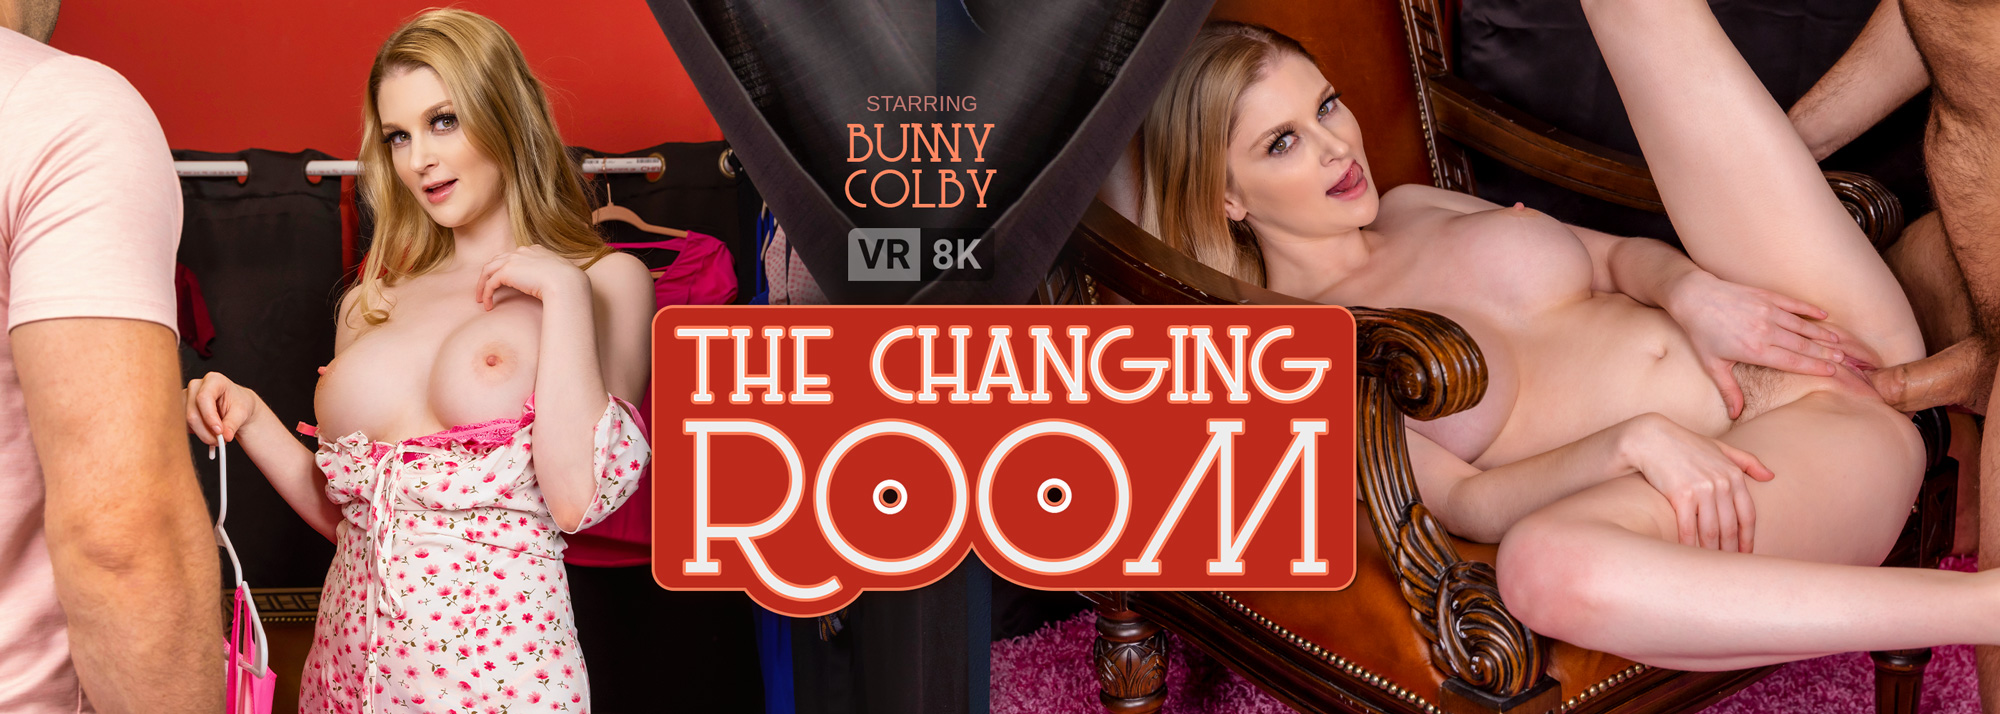 Video Room - The Changing Room VR Porn Video: 8K, 4K, Full HD and 180/360 POV | VR  Bangers